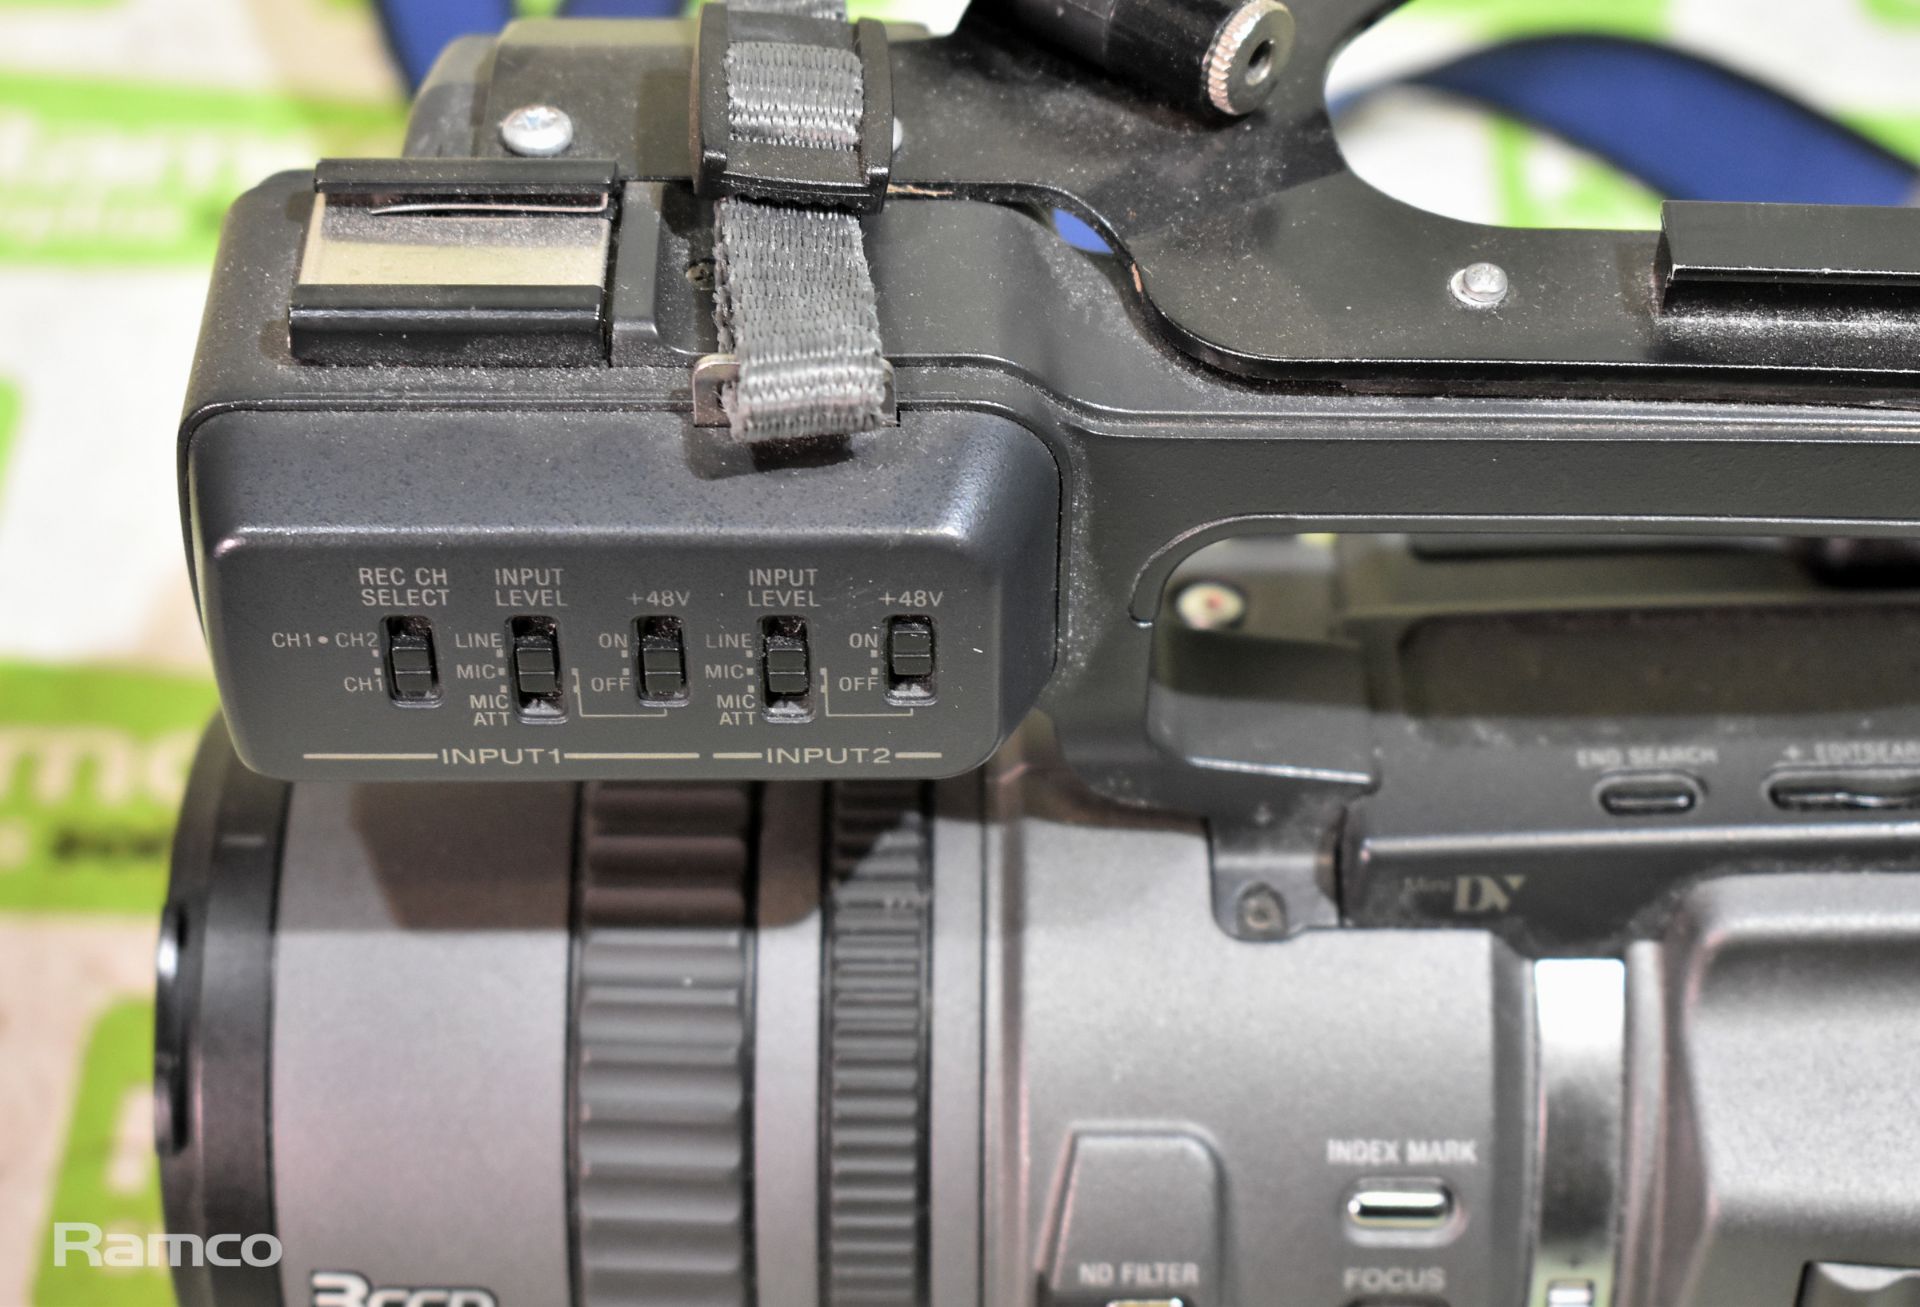 Sony DSR-PD150P digital camcorder - NO BATTERY - Image 3 of 7